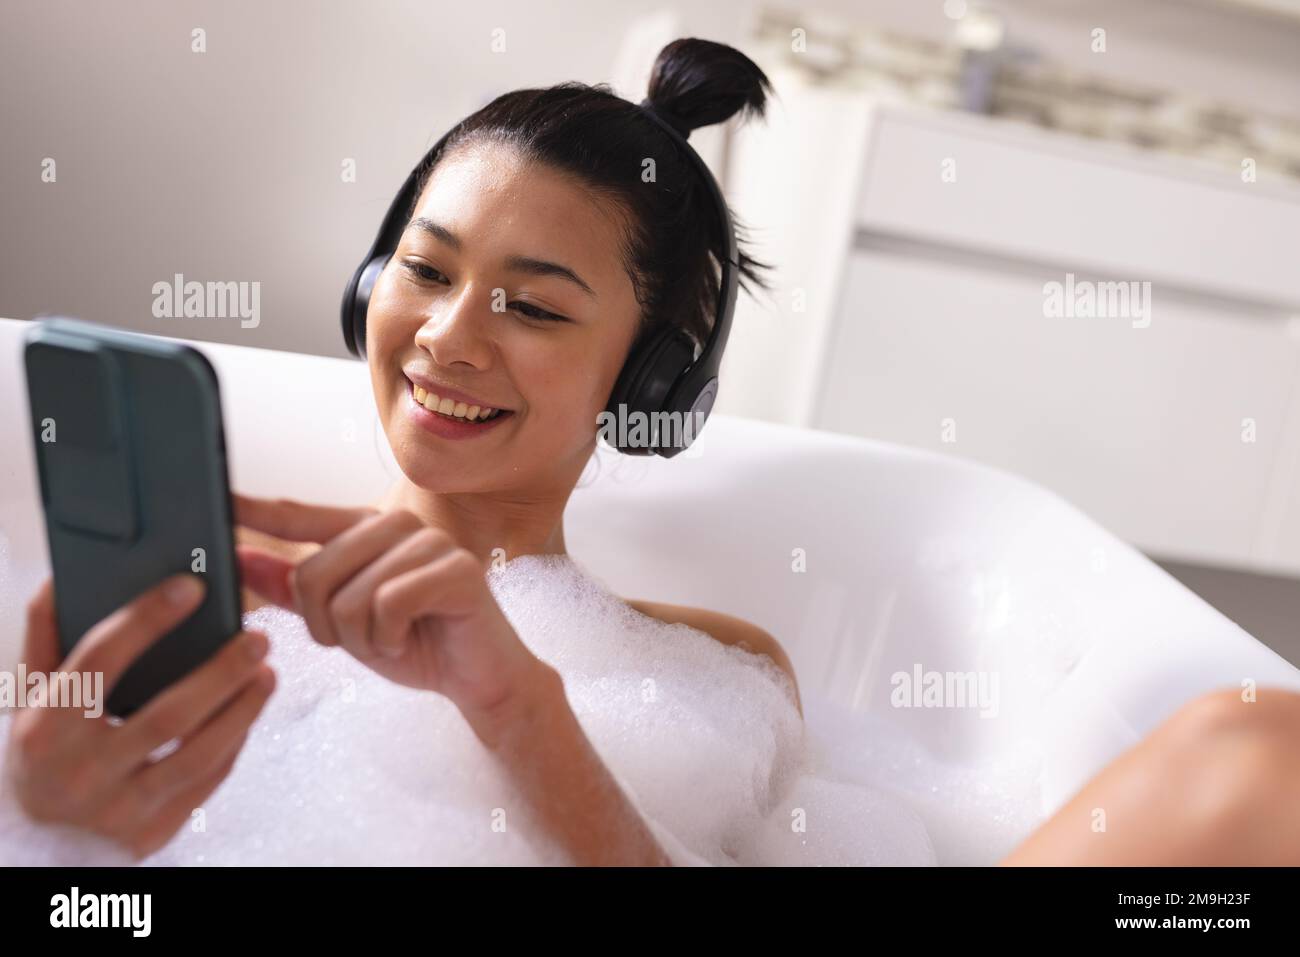 image-of-biracial-woman-relaxing-with-headphones-and-smartphone-in-bathtub-in-bubble-bath-2M9H23F.jpg